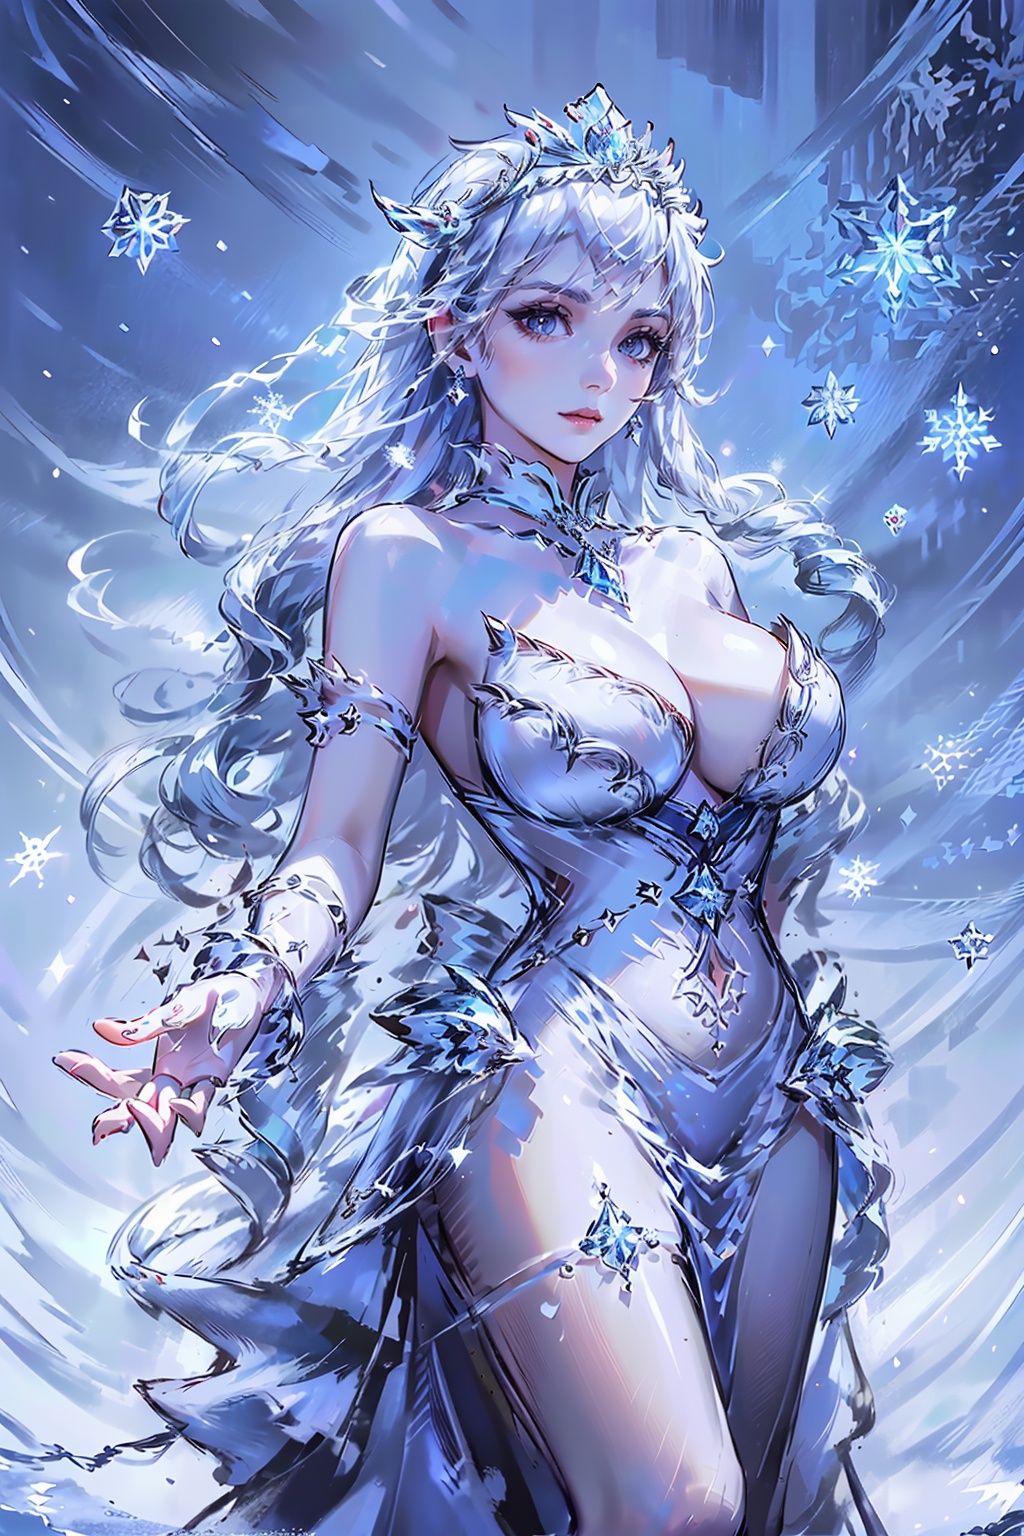  (Elegant Ice Princess:1.5)::5, (Frozen Royalty:0.95), (Arctic Monarch:1.25),
(A regal figure in an exquisite ice palace, the epitome of elegance, (Icebound queen's allure:1.15), Glacial realm, (Frosty enchantment:1.2), (Icy sovereignty, frosty majesty:1.2)
(Crystal tiara and snowflakes:1.1), (Frozen elegance:1.1), (Ice queen's command, chilling beauty:1.1), Ruling over the frozen kingdom, (Enchanted by her frosty grace),
Glacial realm, (Frosty enchantment:1.2), (Icy regency, arctic authority:1.2)
Ice princess, regal royalty, arctic majesty, elegant ice palace, icebound allure, glacial realm, crystal tiara, frozen elegance, chilling beauty, frozen kingdom, enchanted frosty grace, icy sovereignty, frosty majesty, royal ice queen, snowflake's beauty., glaze